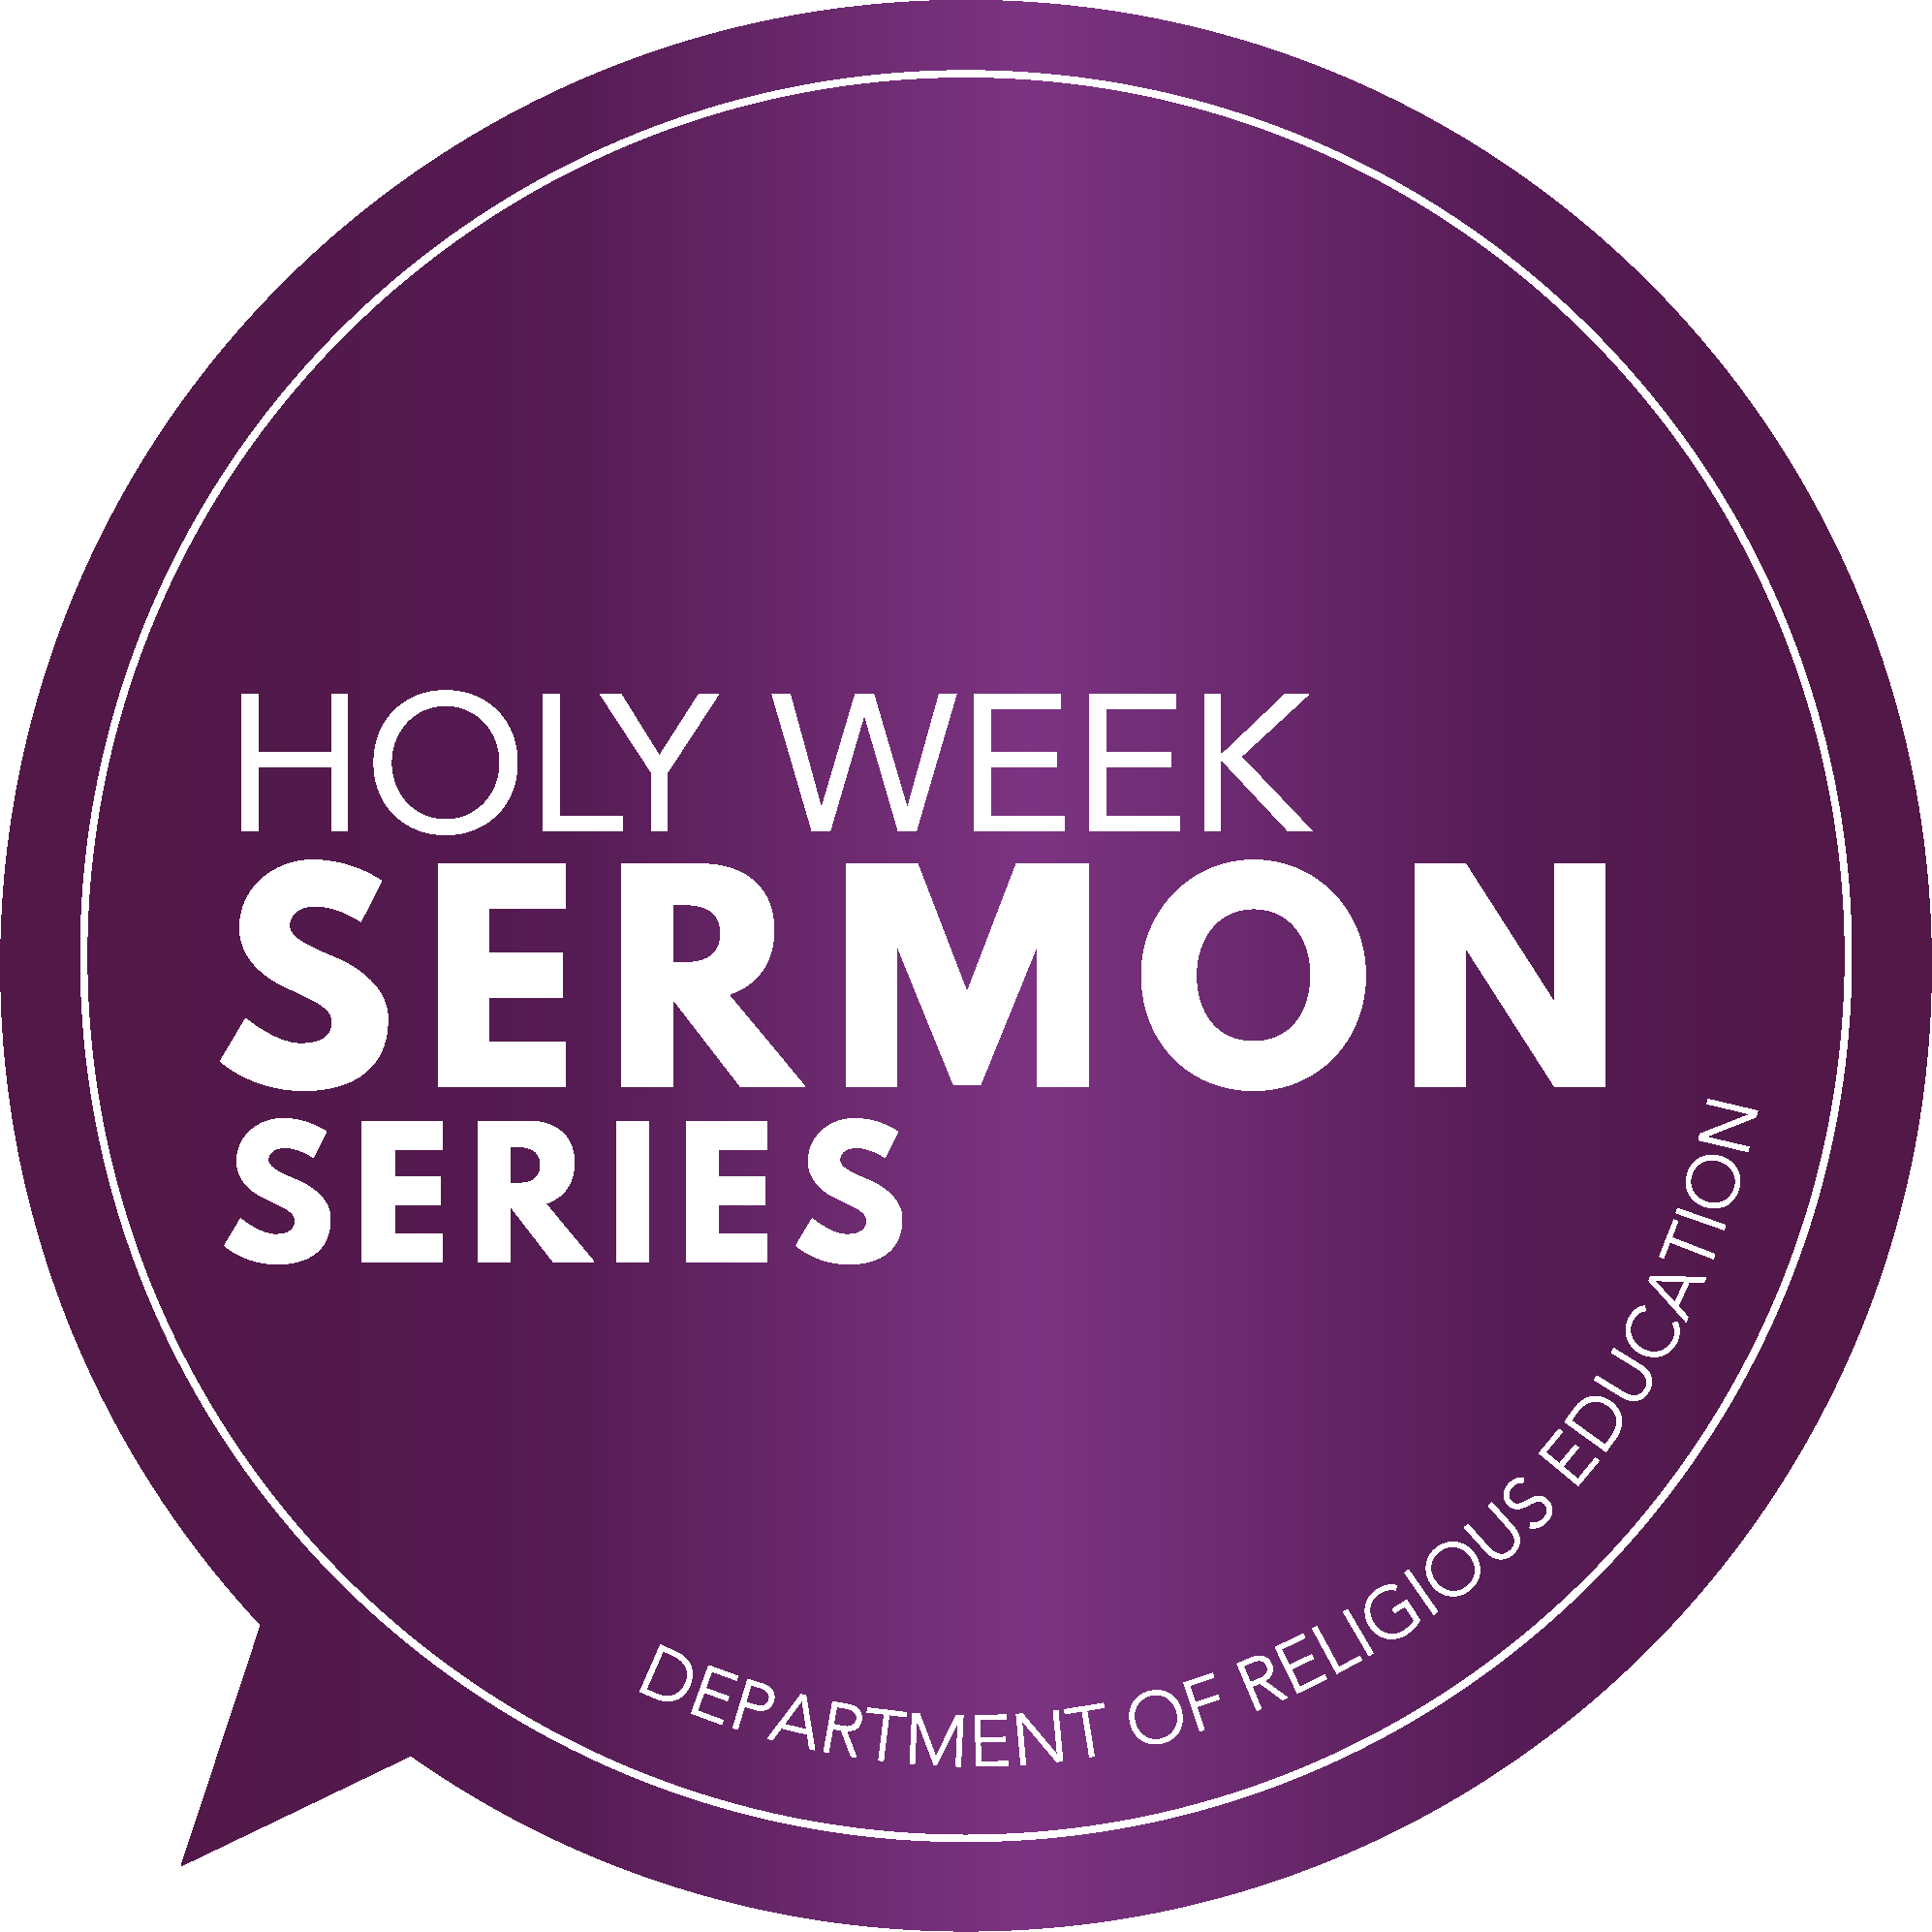 MISSED US? THE DRE HOLY WEEK SERMON SERIES IS BACK FOR THE WEEK!